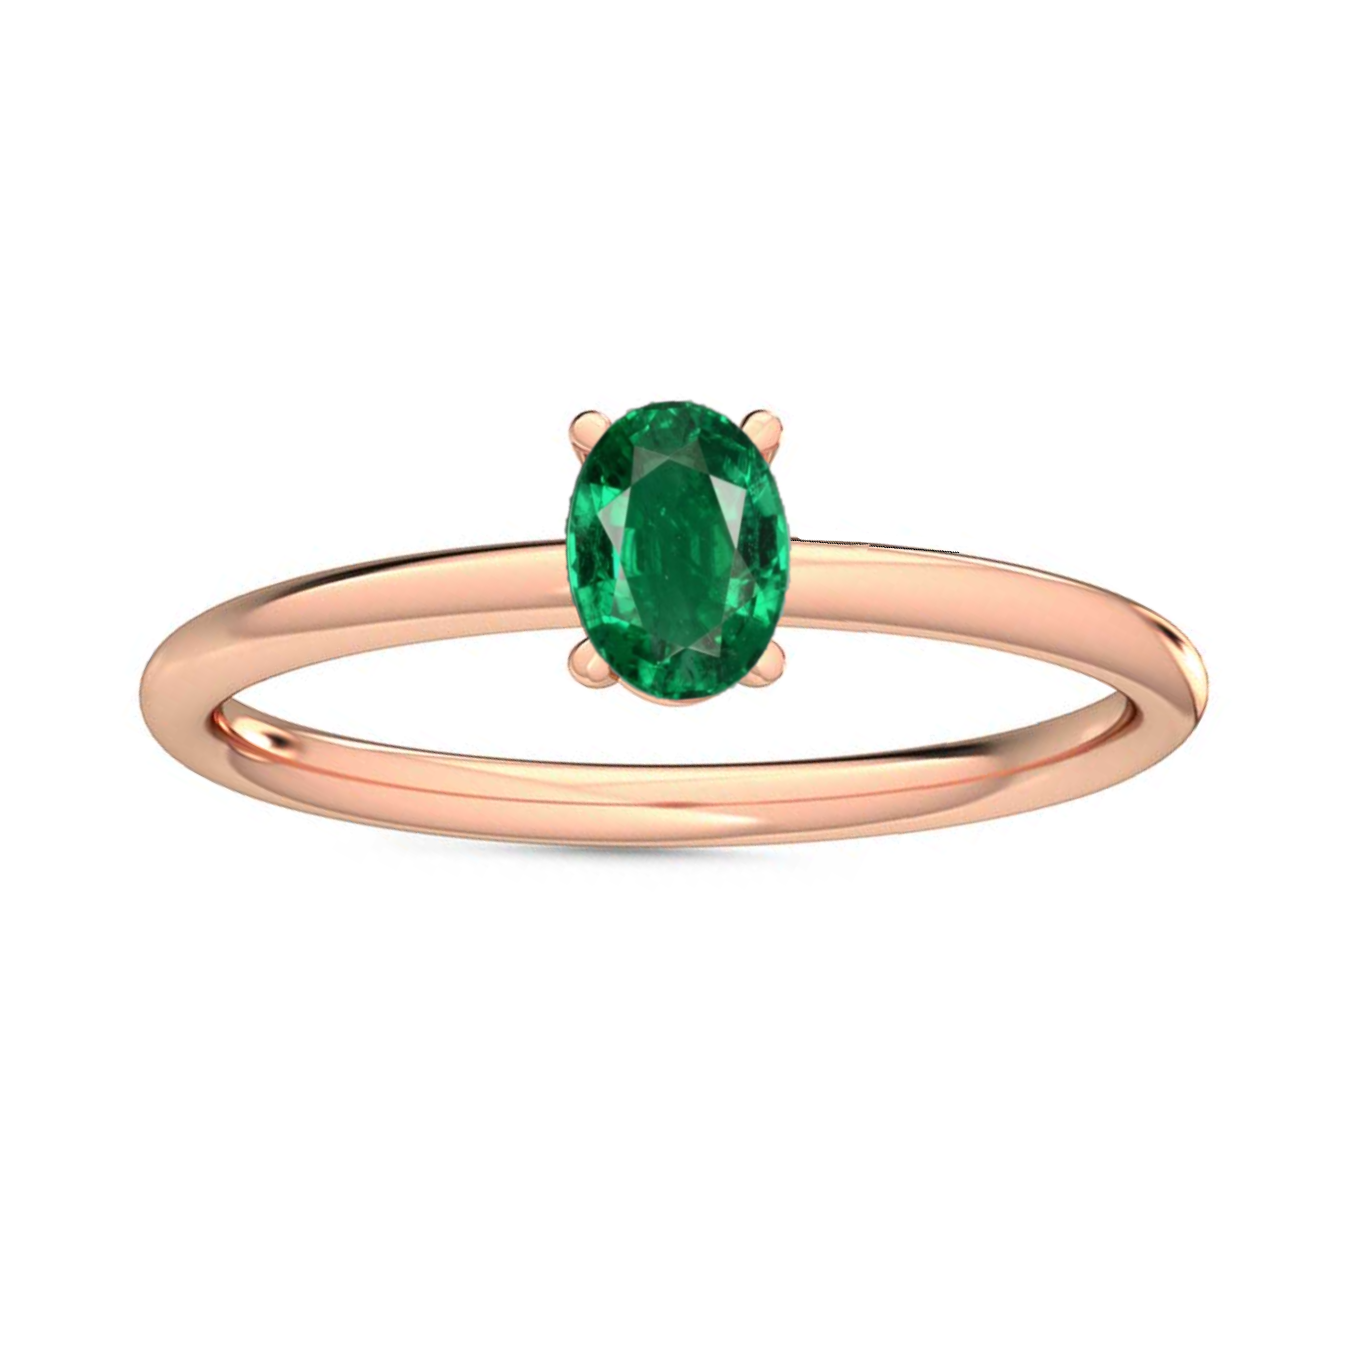 Emerald Ruby Sapphire Petite-Minimalist-Precious Gemstone-Solitaire-Engagement-Promise-Ring for Women,-14k-White-Rose-Yellow-Gold, Fine Jewelry